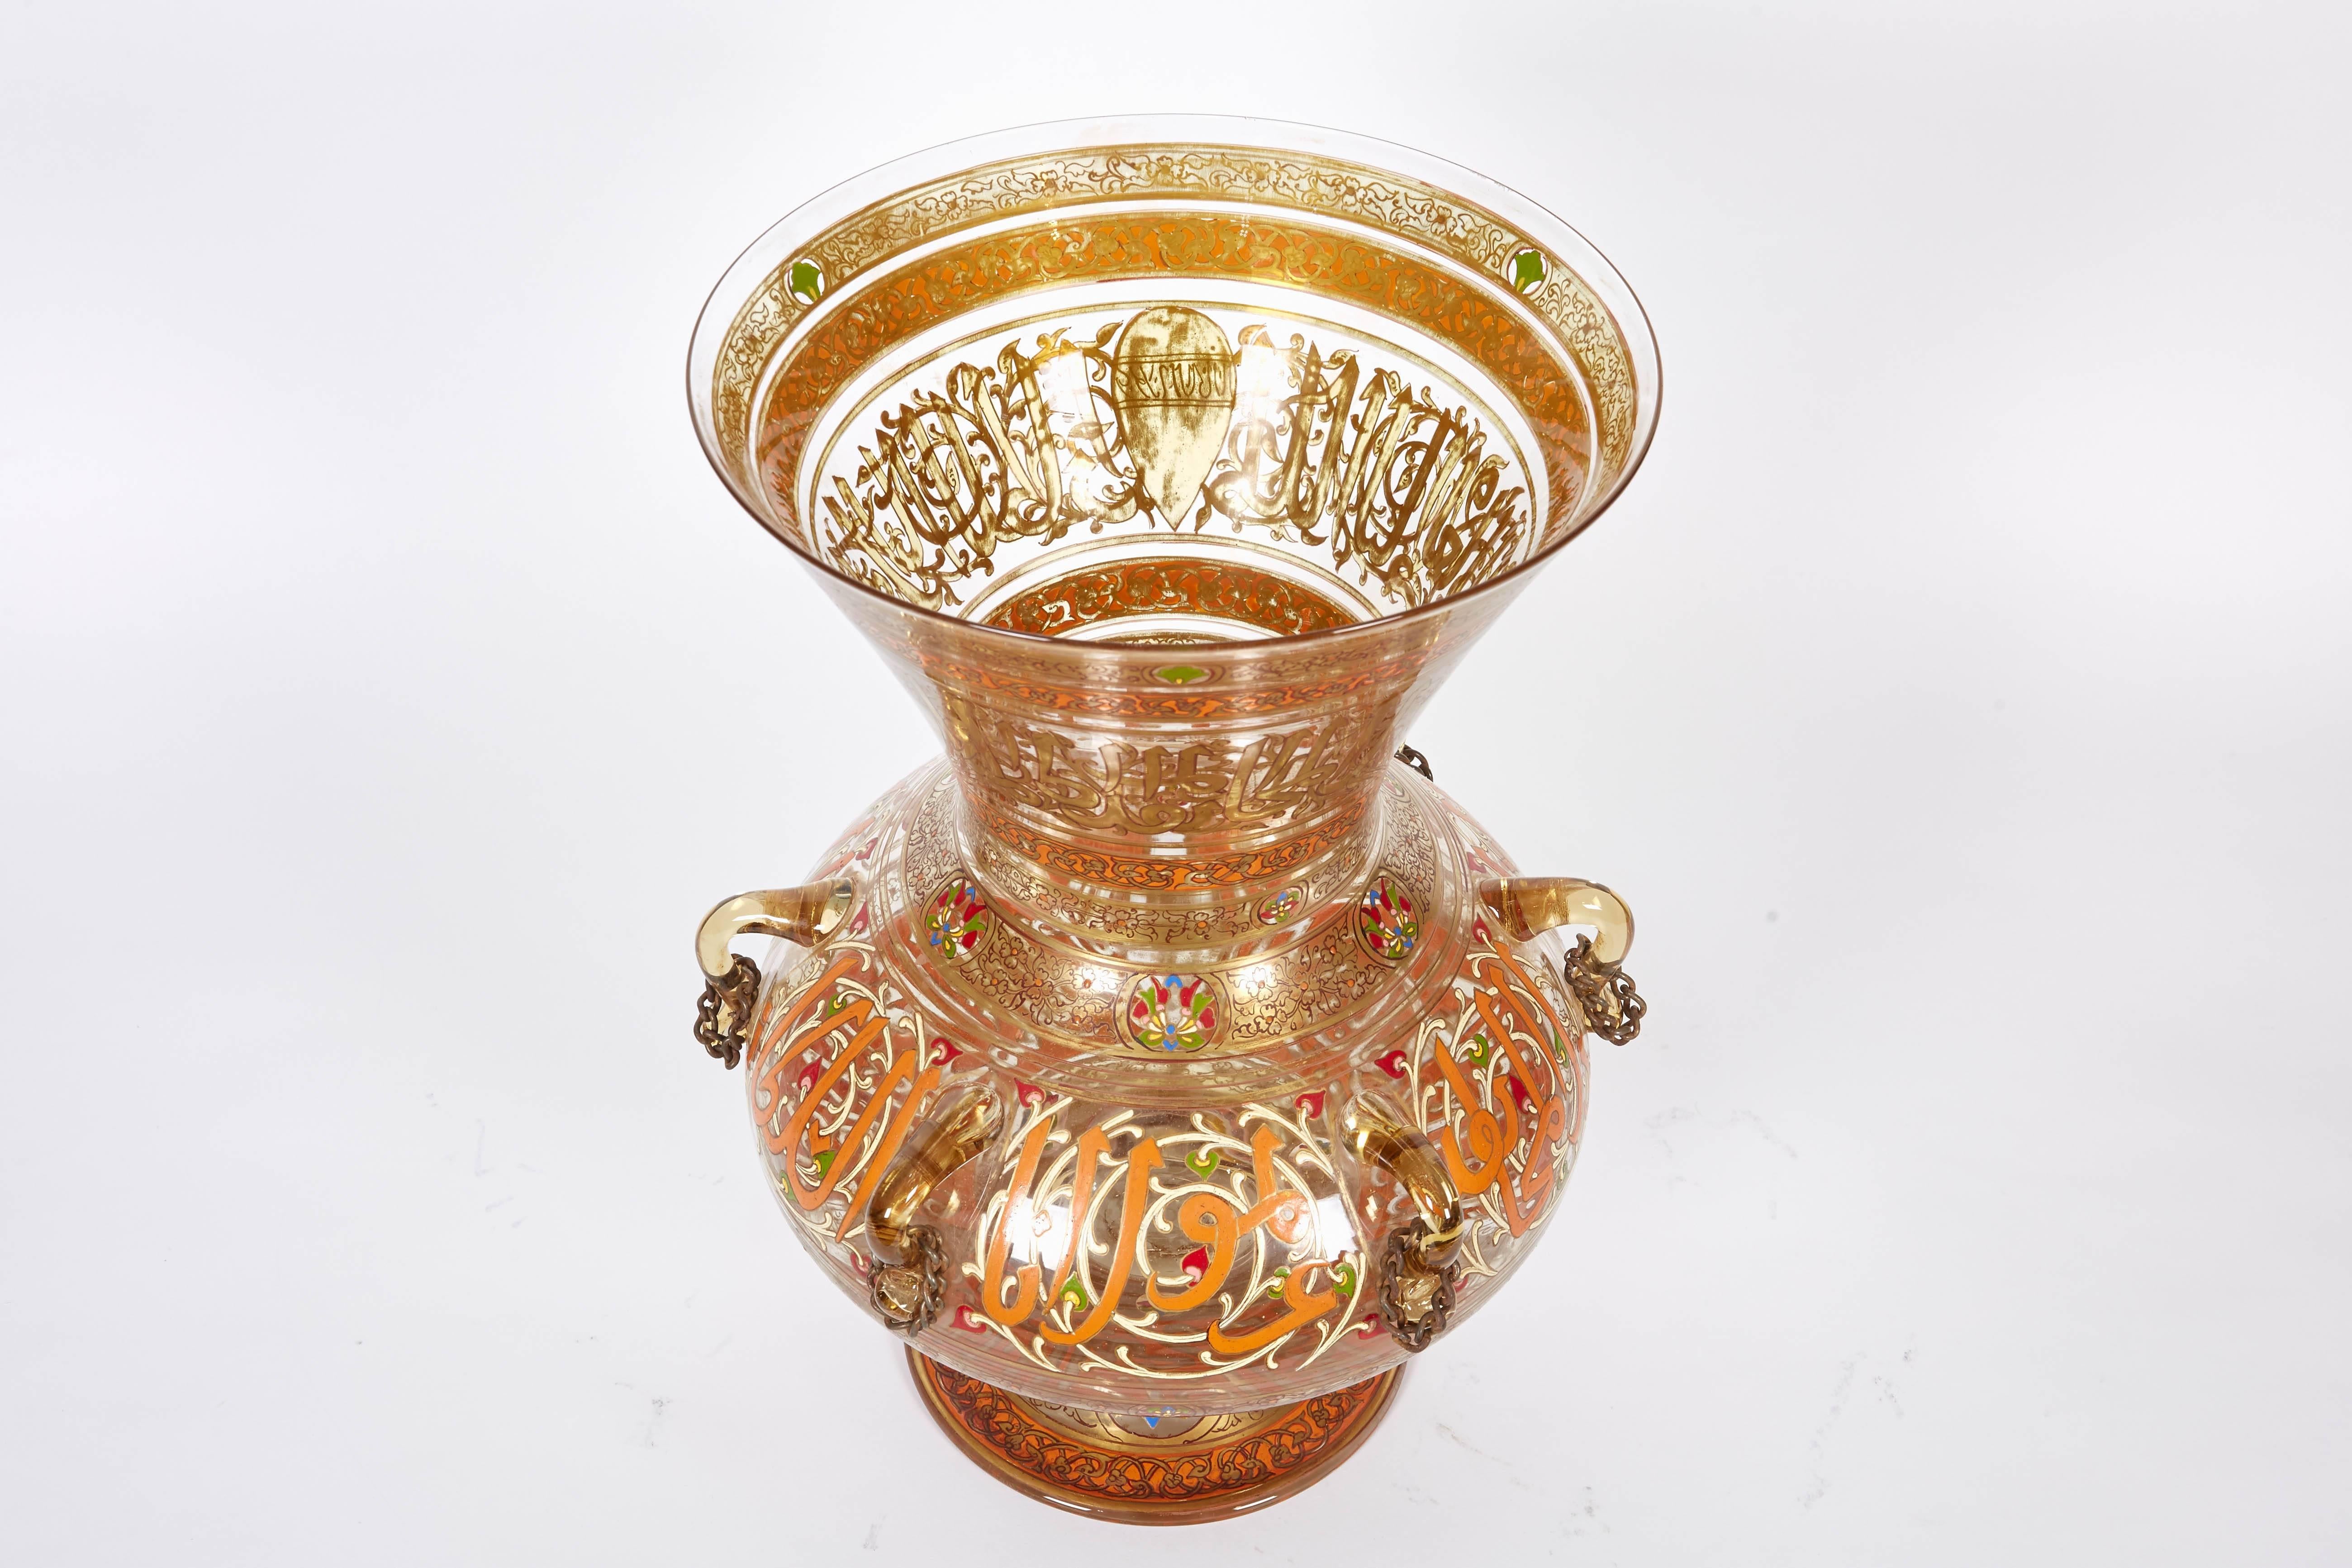 Rare French Enameled Mamluk Revival Glass Mosque Lamp by Philippe Joseph Brocard For Sale 8